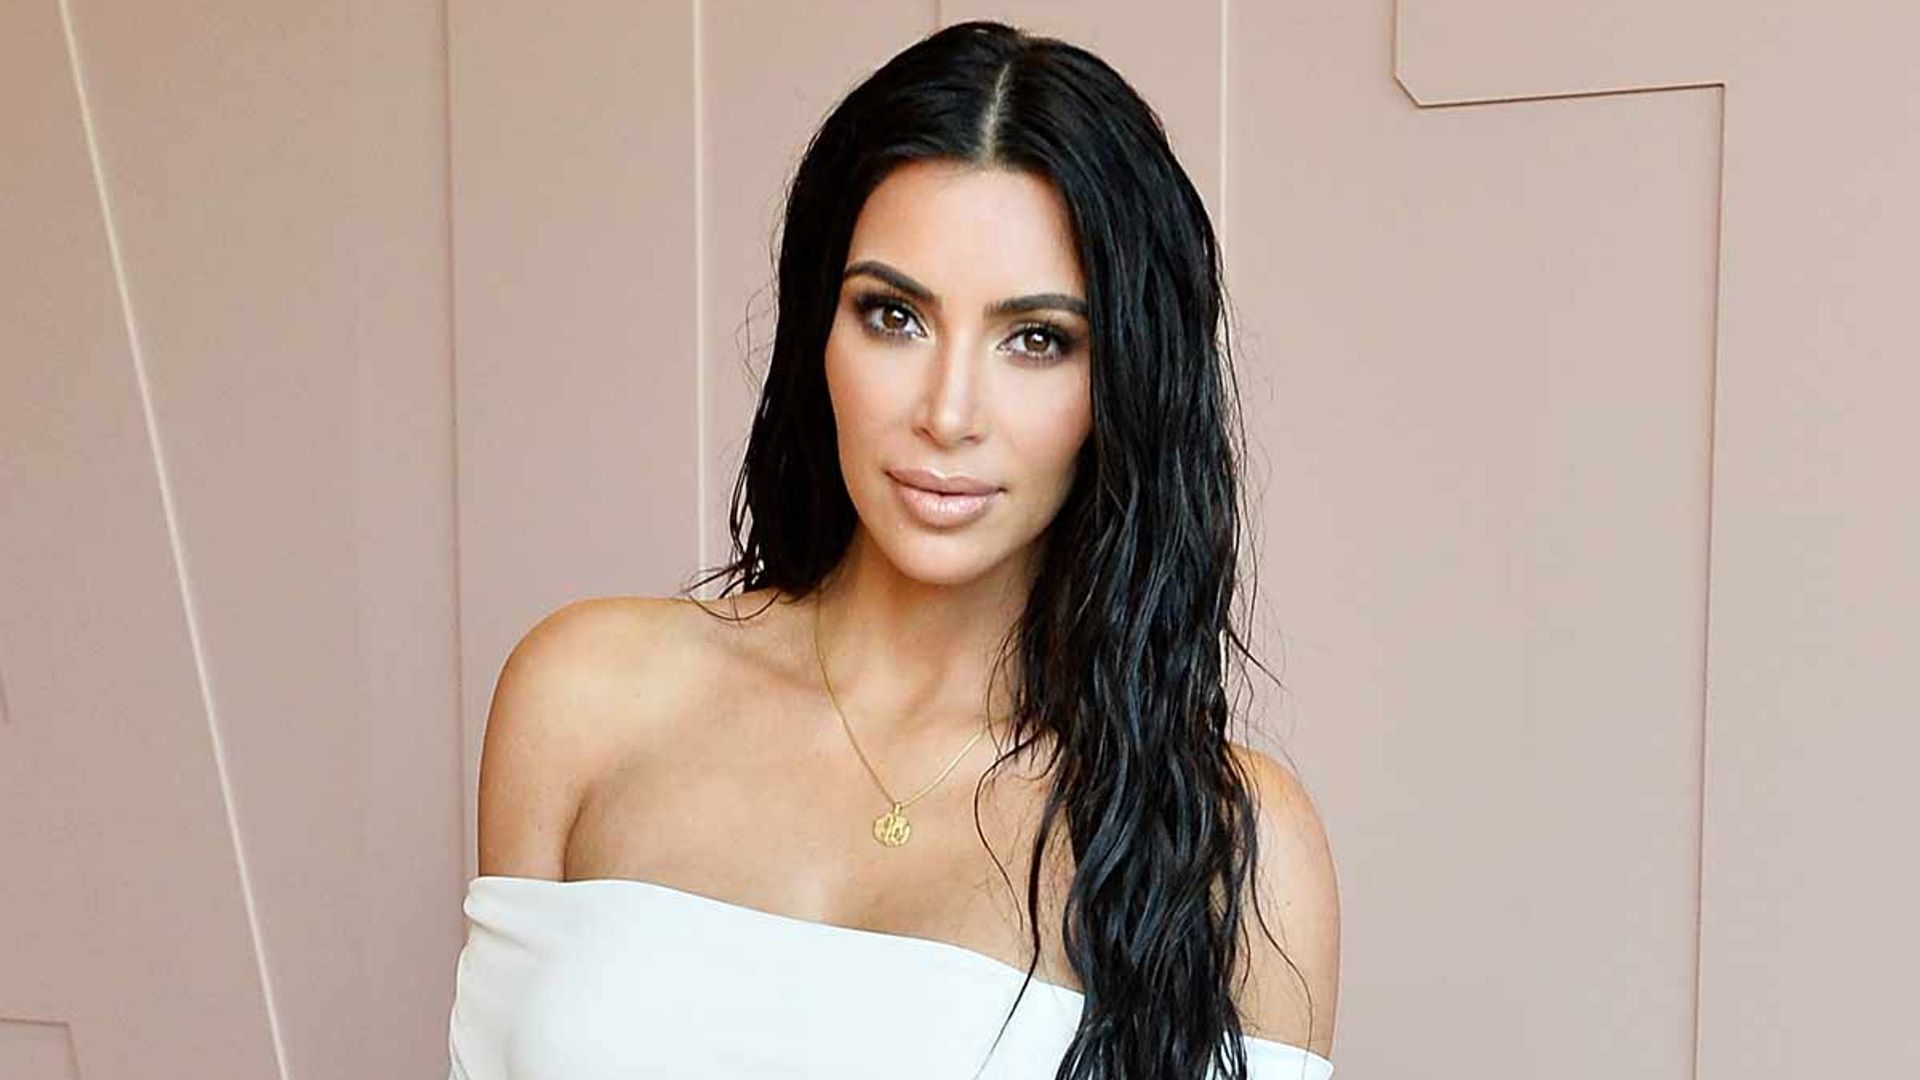 Brides can now recreate Kim Kardashian's wedding beauty look with new makeup line